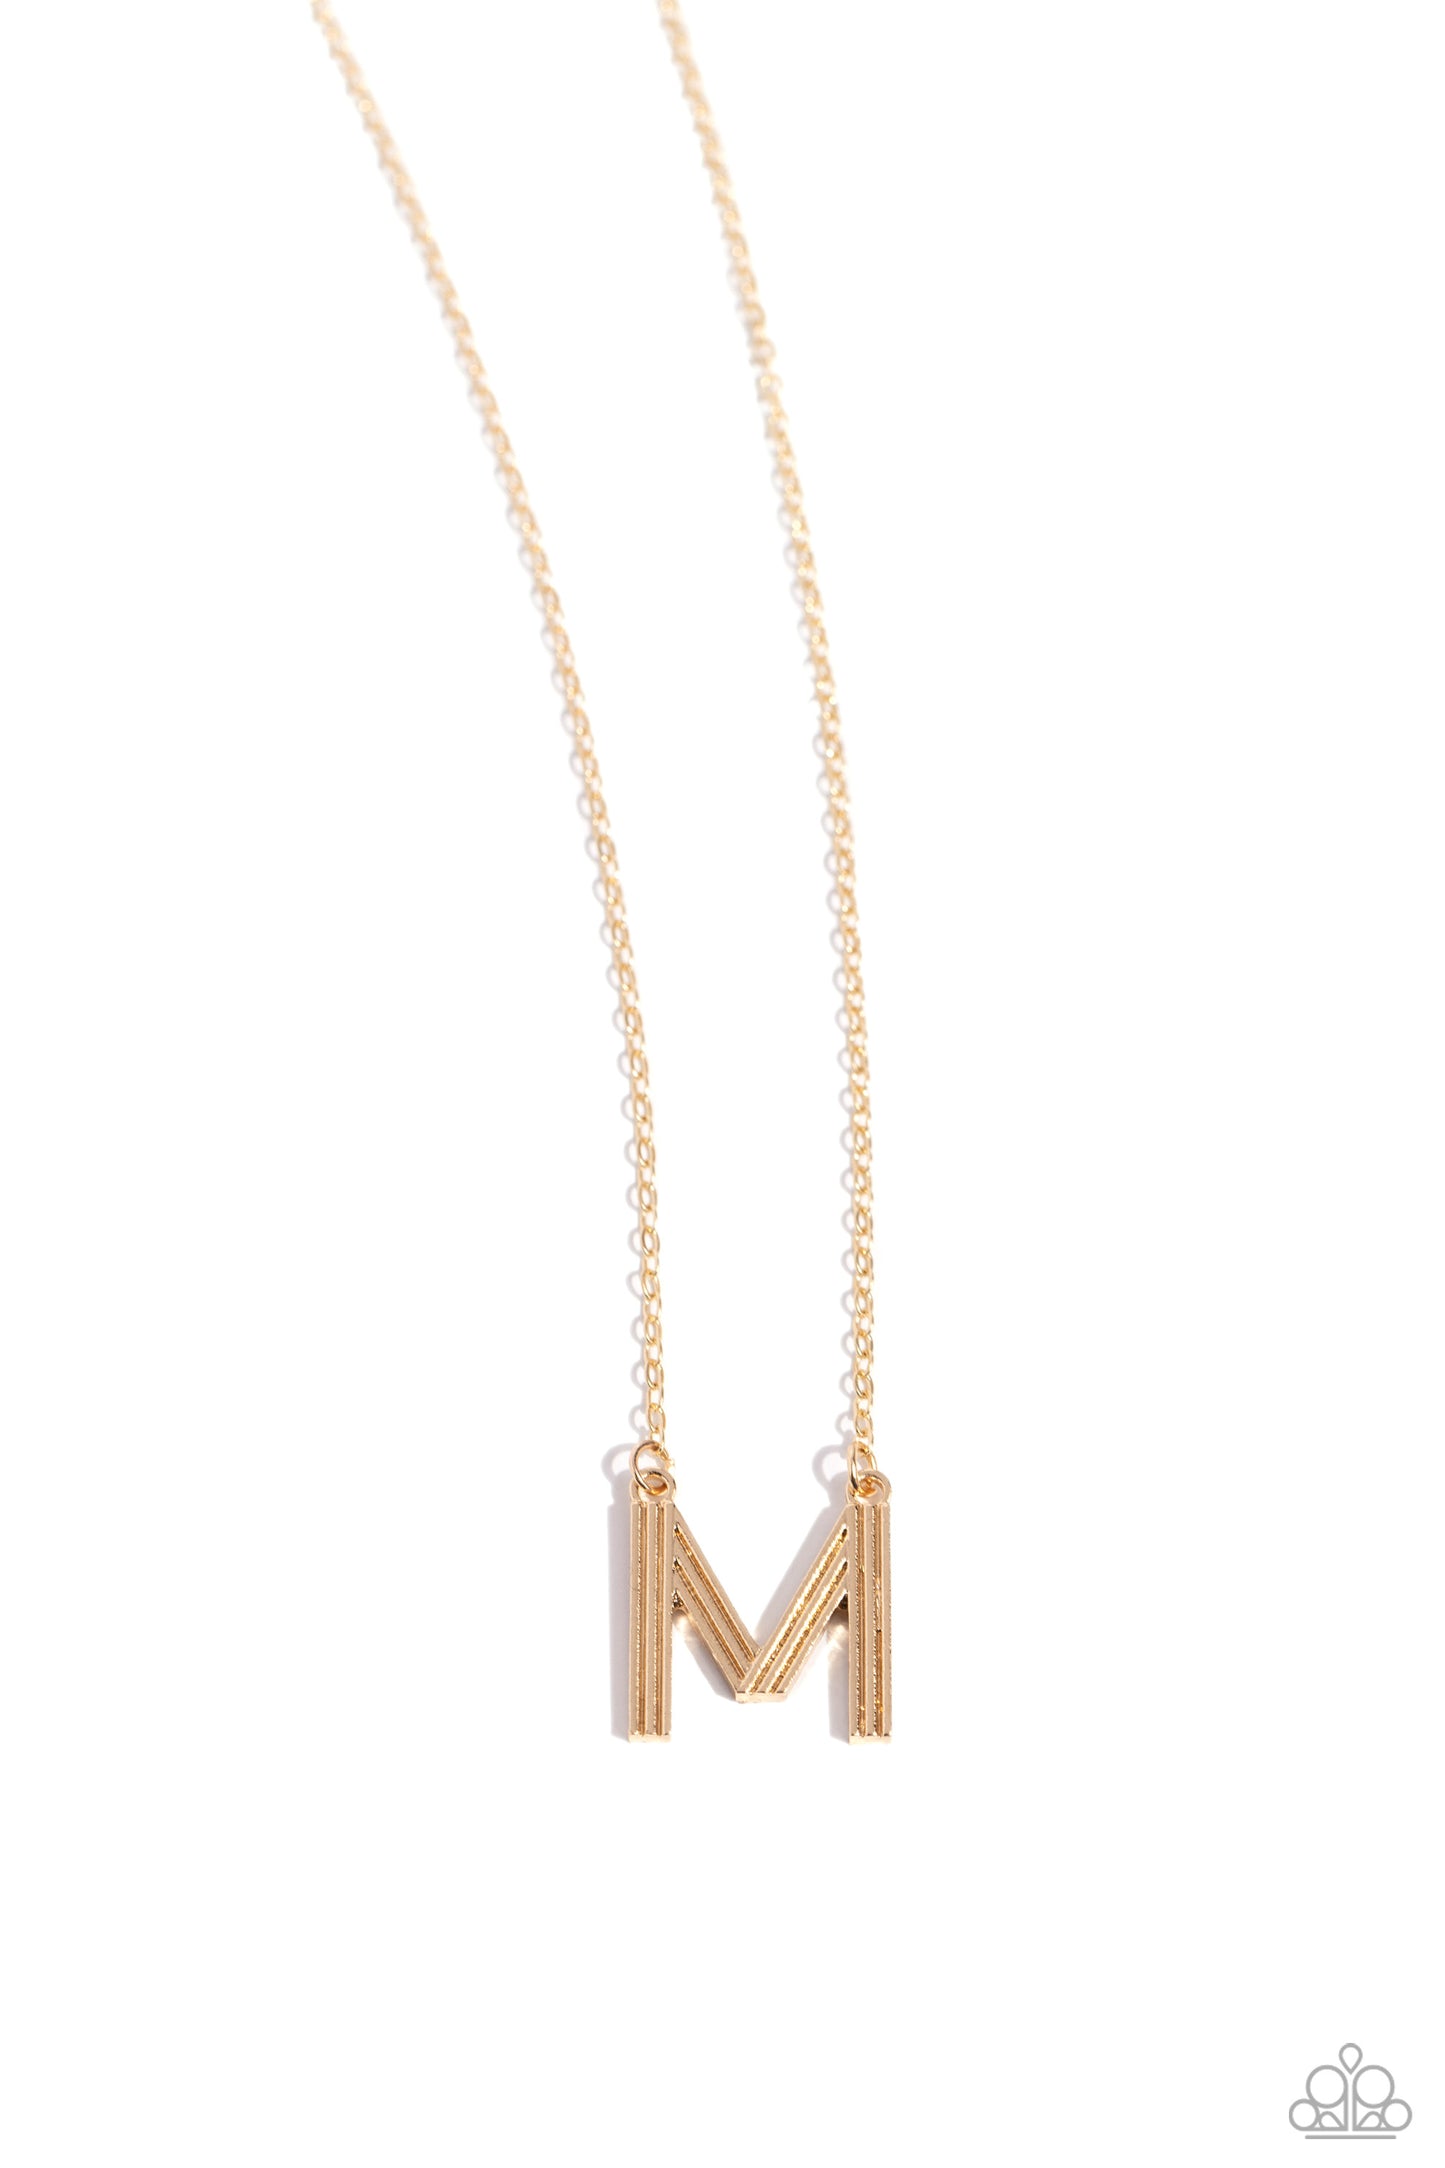 "Leave Your Initials" - Gold #502 - Paparazzi Accessories